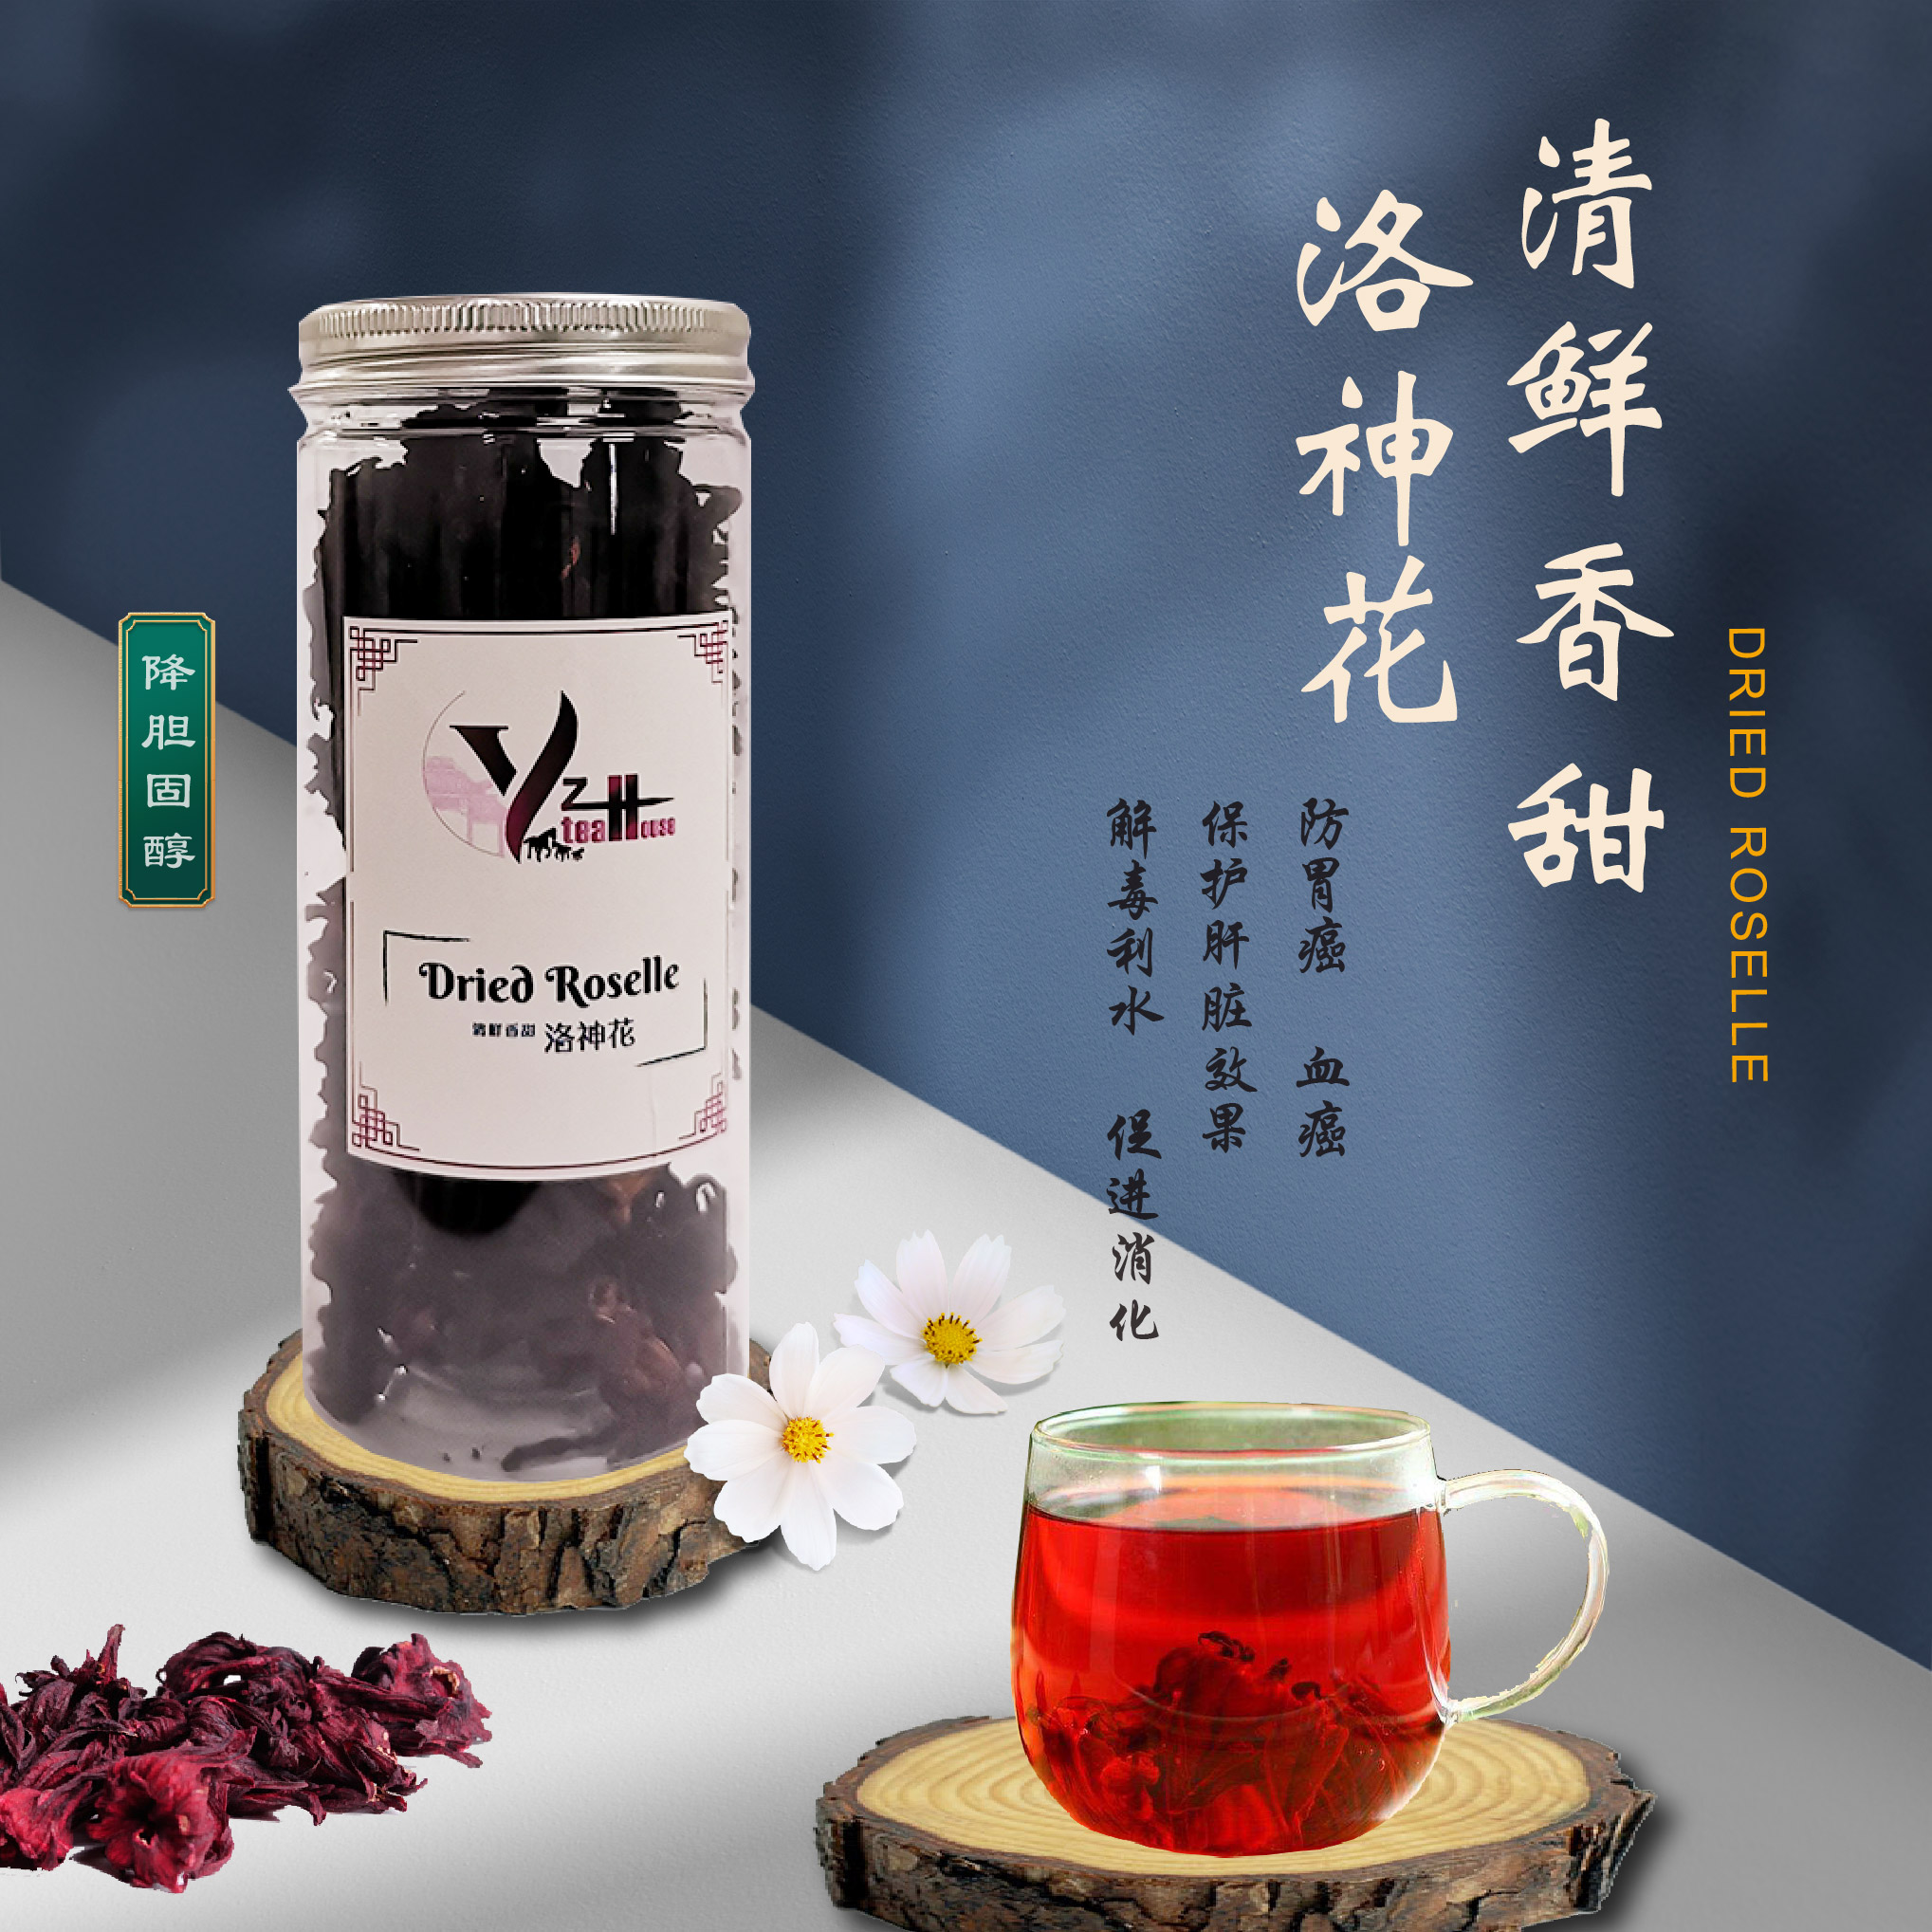 &#28165;&#40092;&#39321;&#29980;&#183;&#27931;&#31070;&#33457;/ Dried Roselle/ 55G